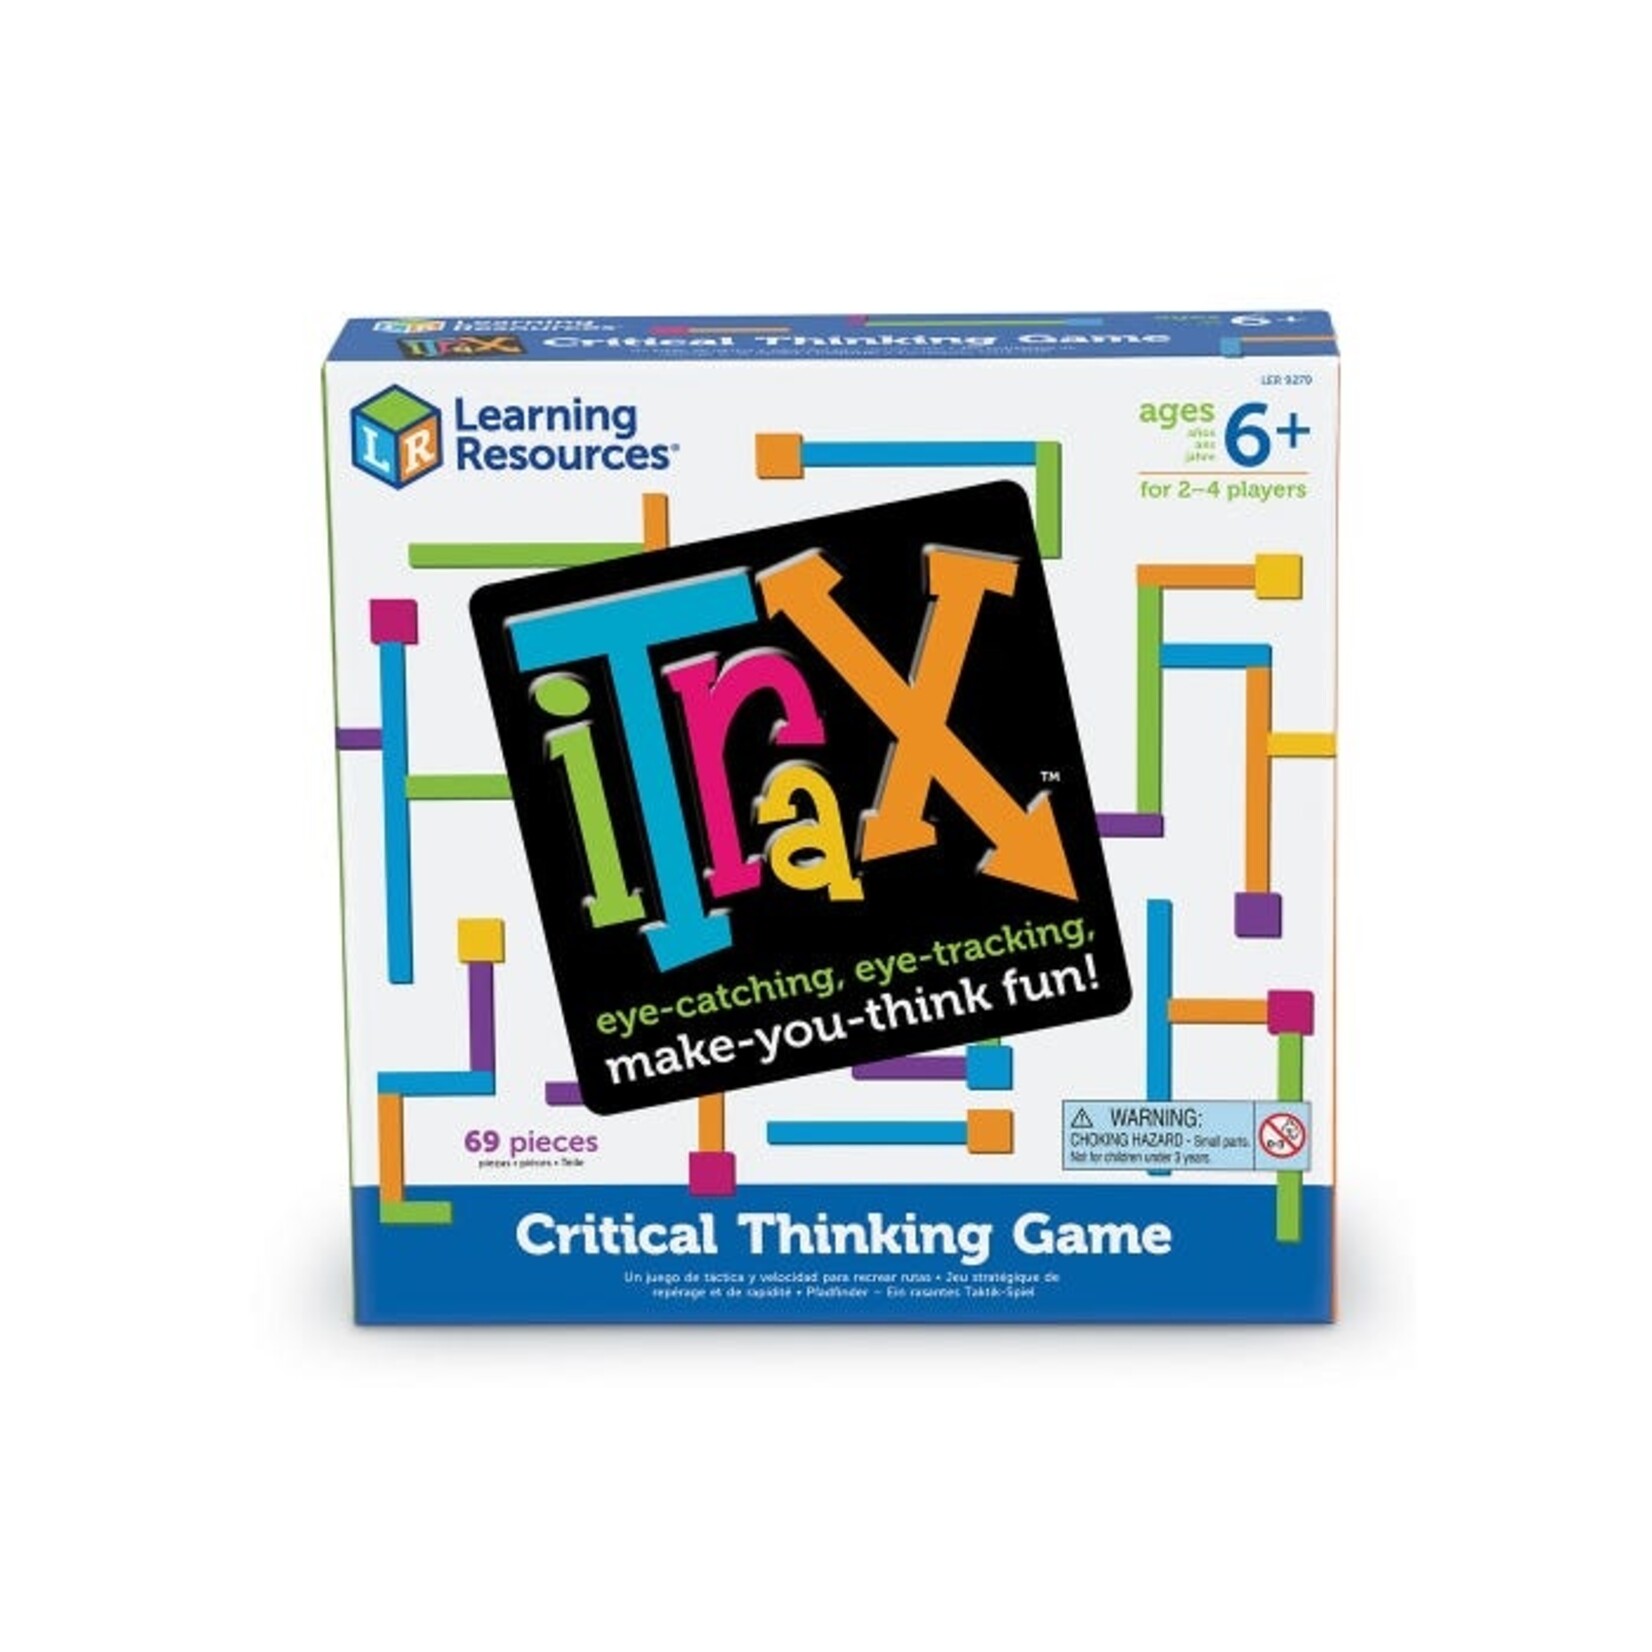 LEARNING RESOURCES INC iTrax™ Critical Thinking Game